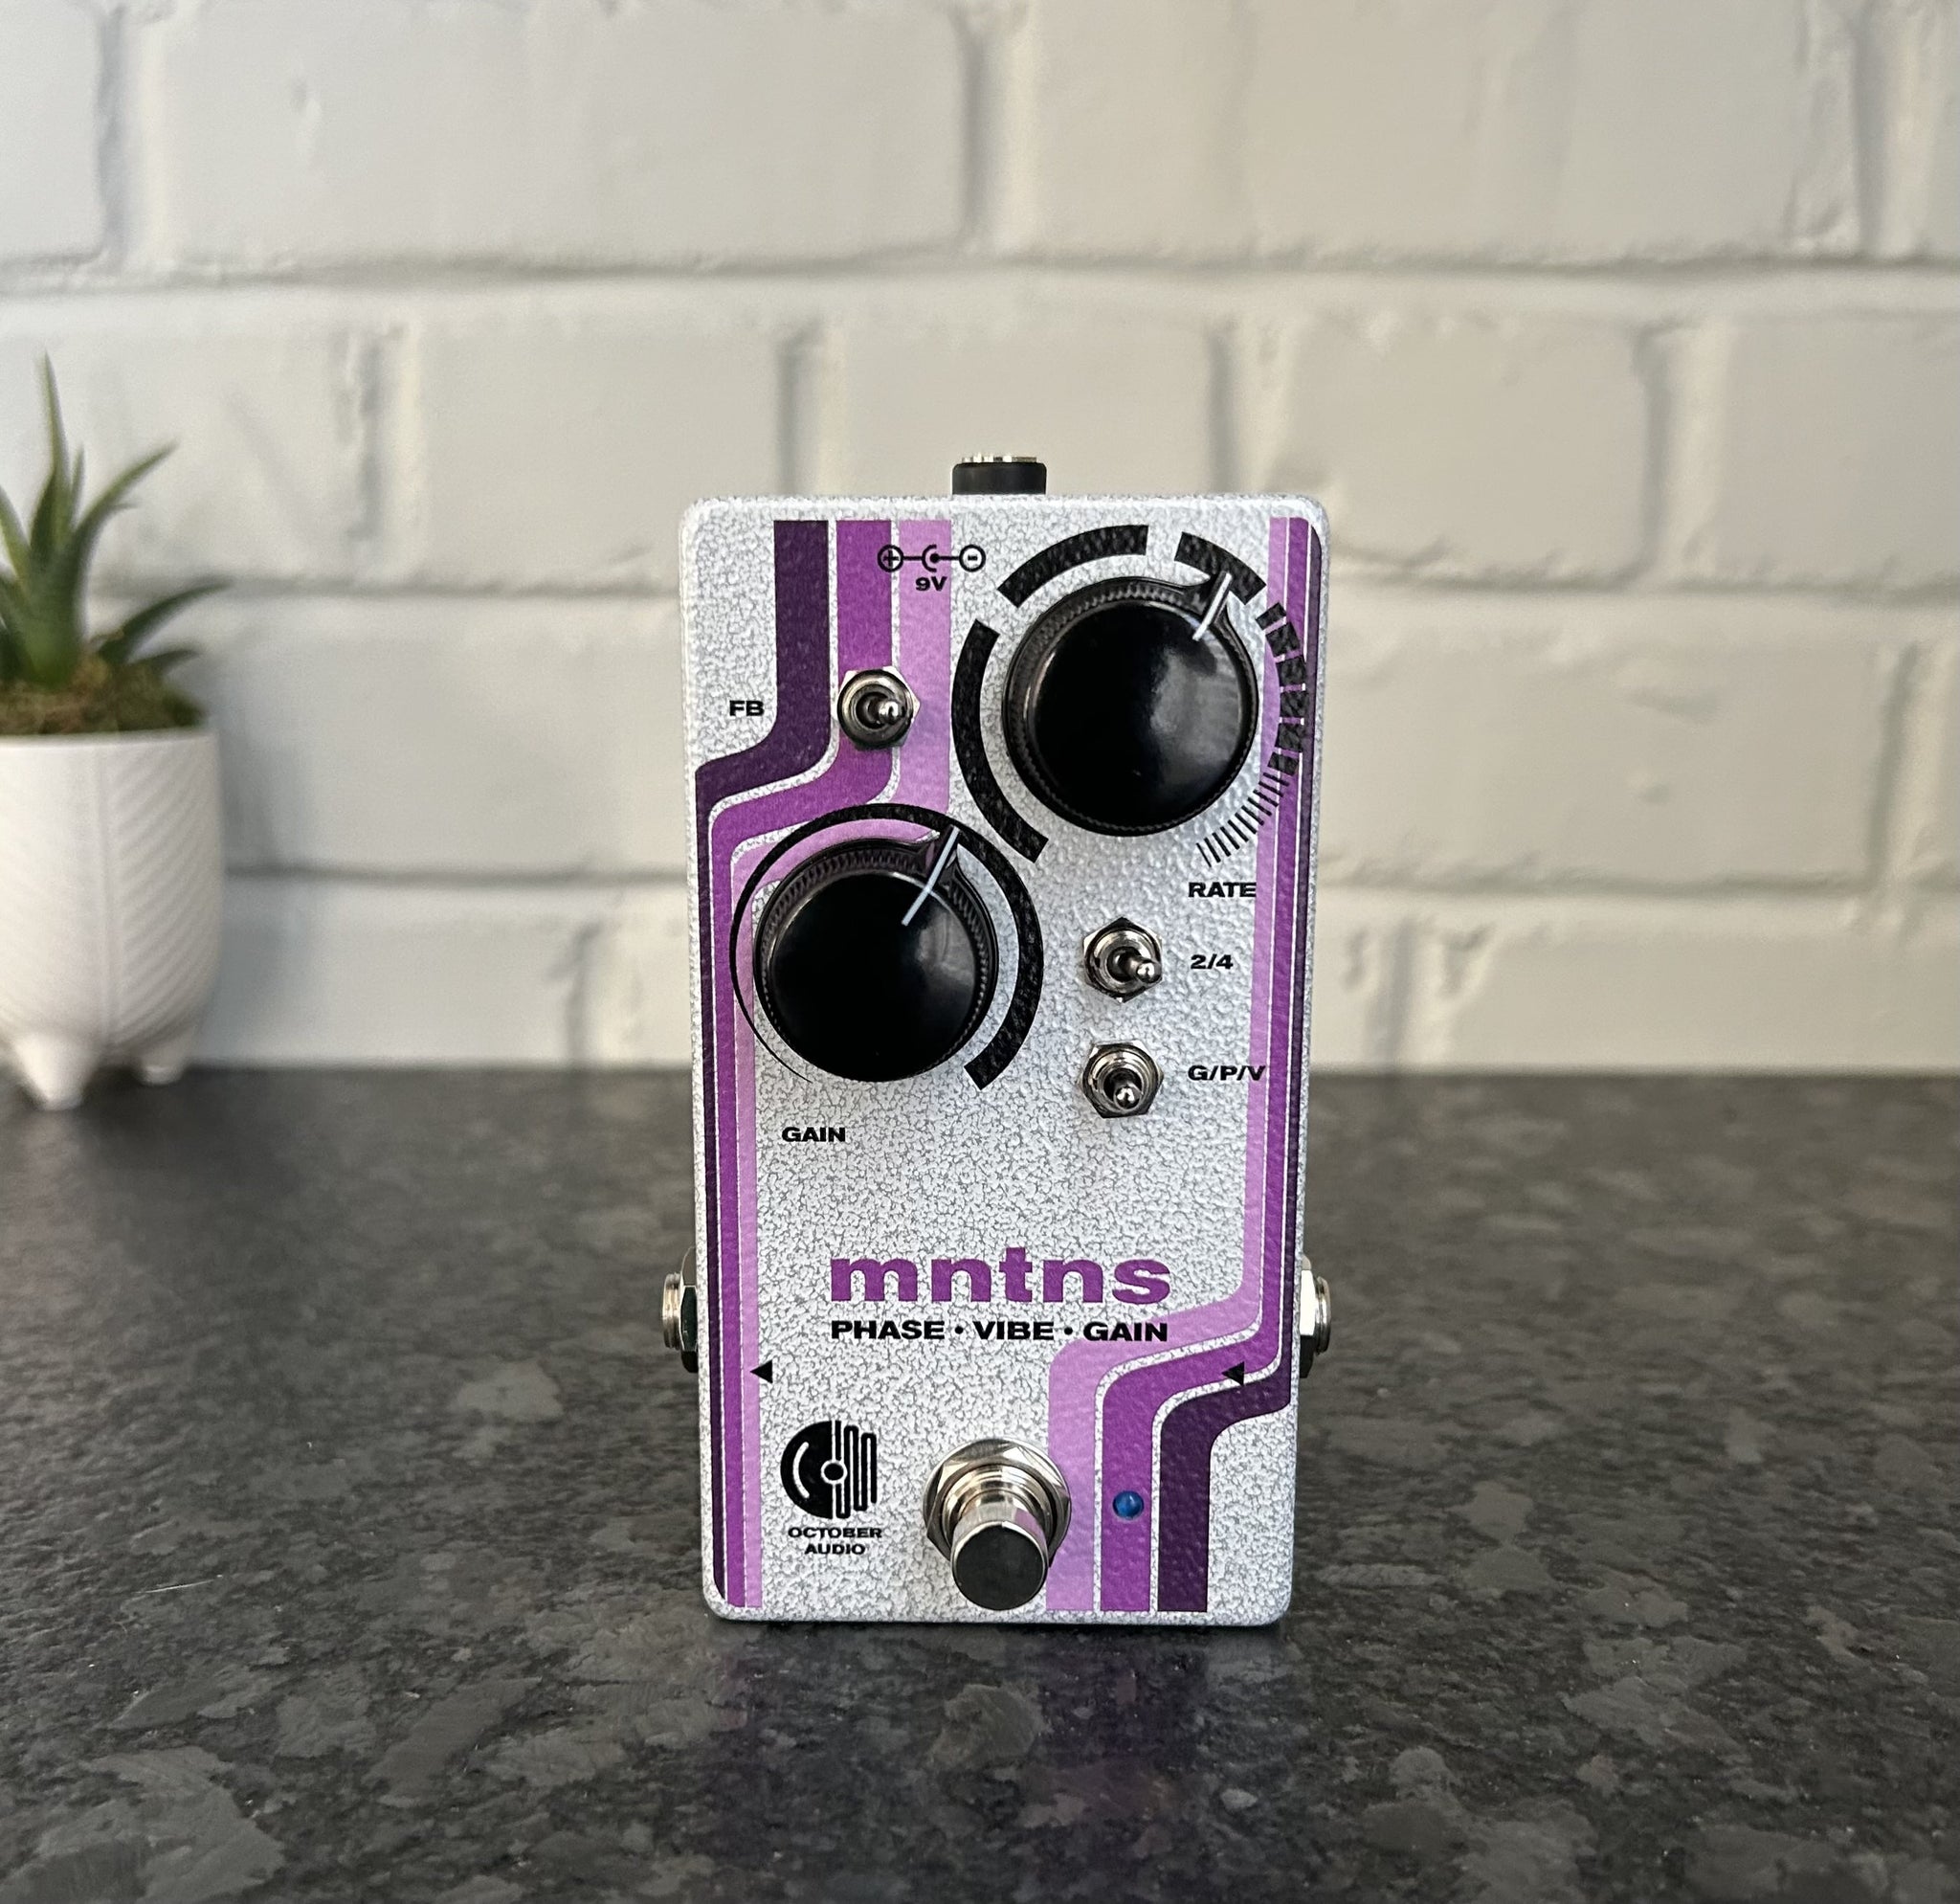 mntns- phaser/vibrato/gain device